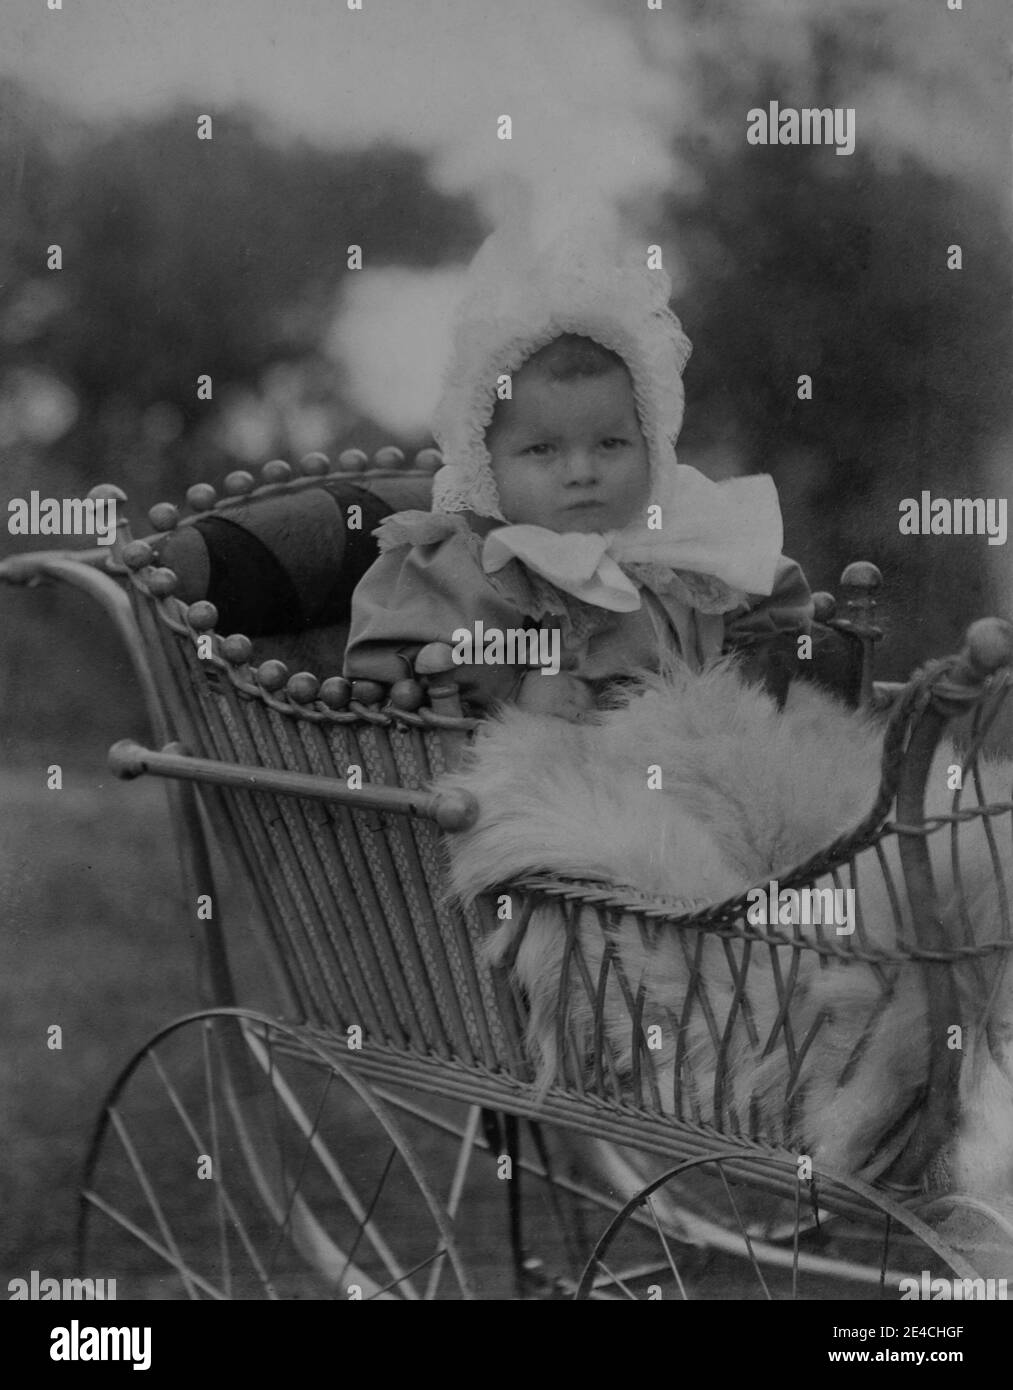 American archive monochrome portrait  of a baby in a bonnet and fur blanket in a pram outdoors. Taken in the late 19th century in Port Byron, NY, USA Stock Photo